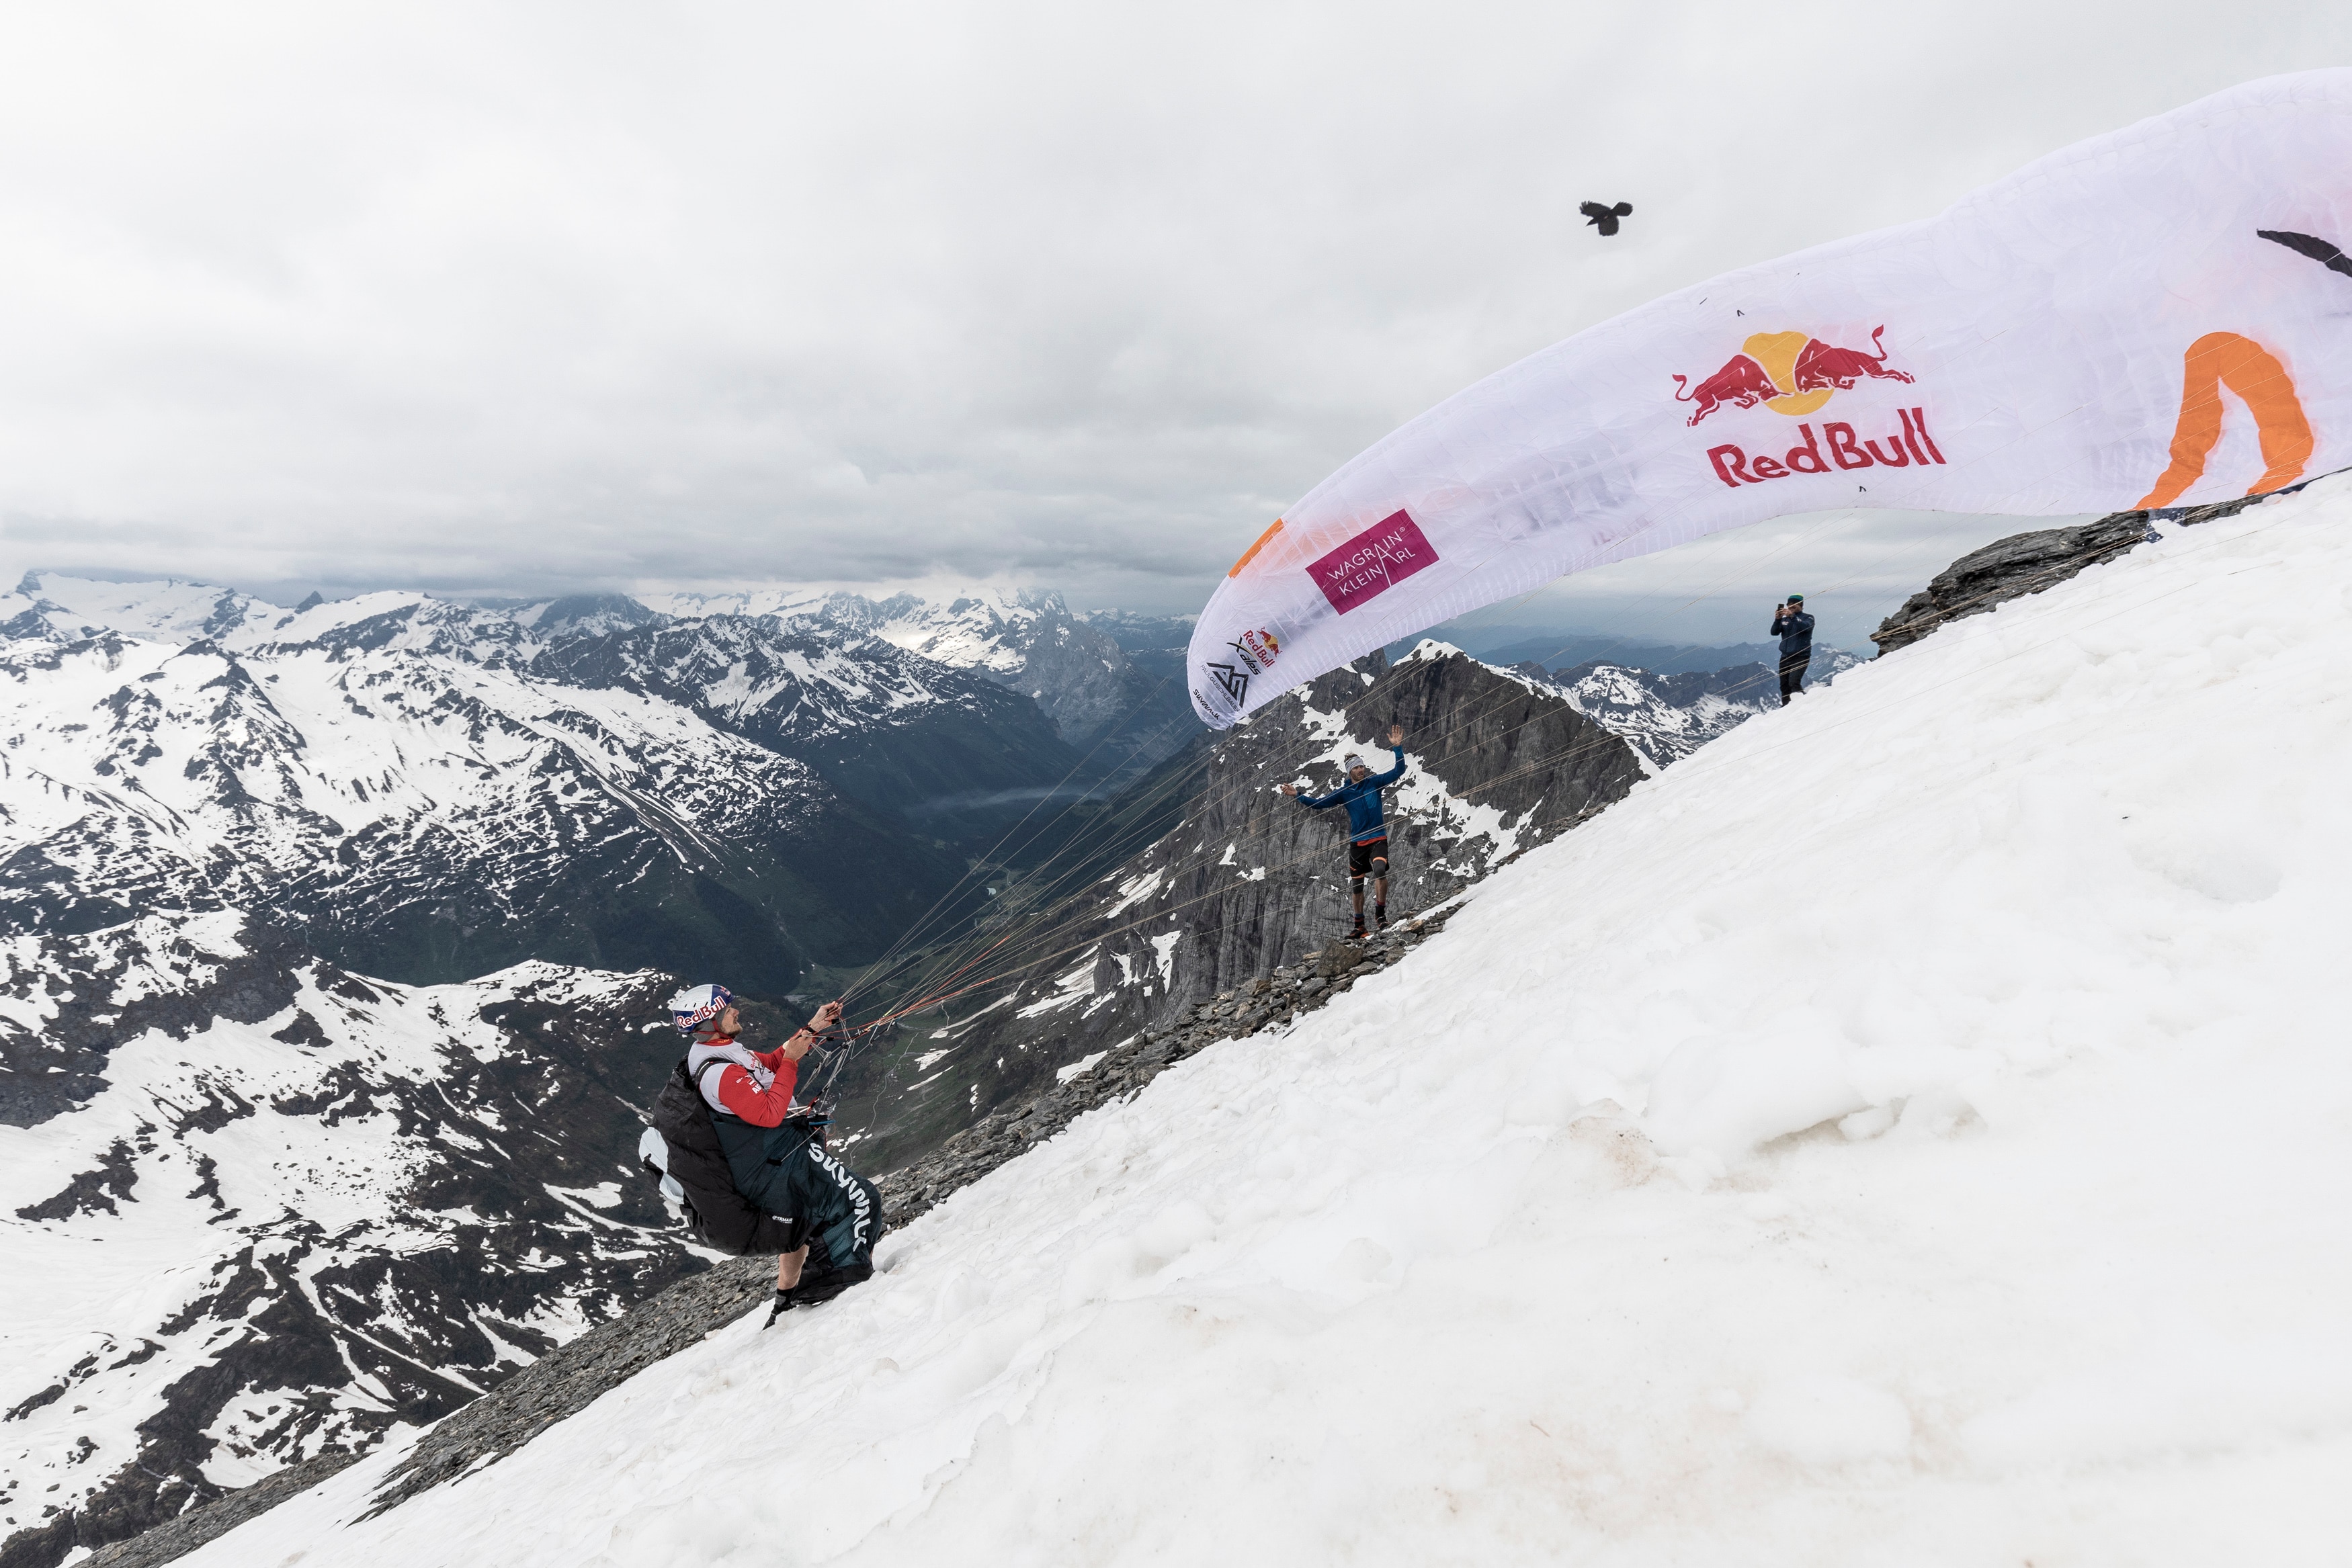 Paul Guschlbauer performs during the Red Bull X-Alps at Turnpoint 7 at Titlis, Switzerland on June 21, 2019 // Harald Tauderer/Red Bull Content Pool // SI201906210473 // Usage for editorial use only //